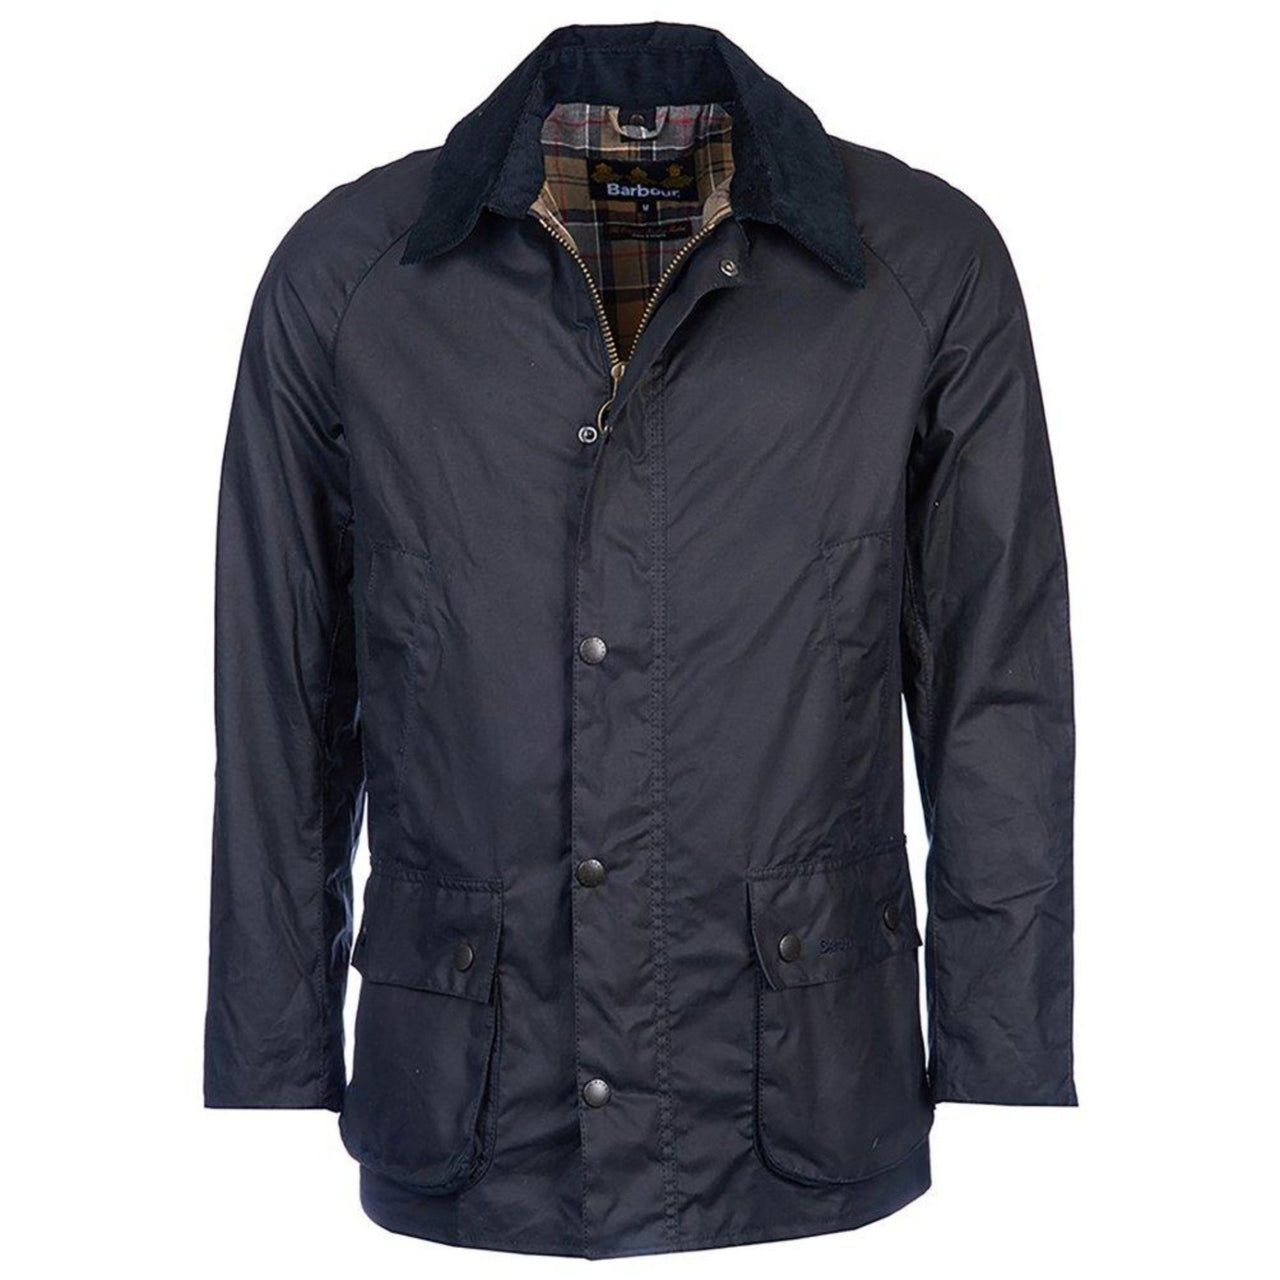 HENRY SARTORIAL X BARBOUR Ashby Wax Jacket NAVY